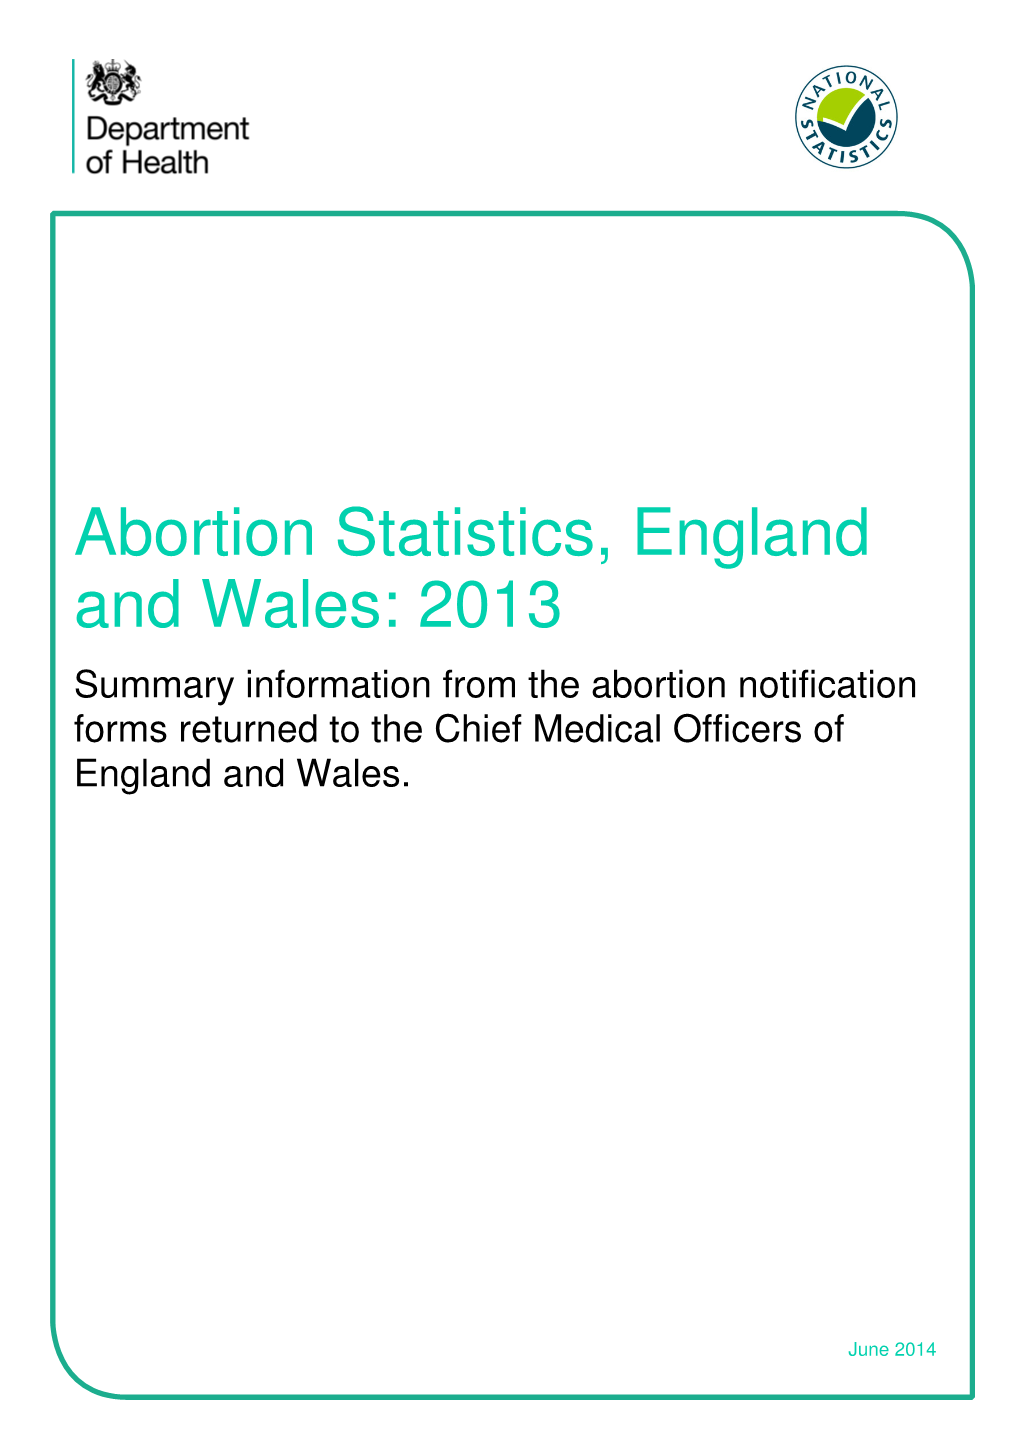 Abortion Statistics, England and Wales: 2013 Summary Information from the Abortion Notification Forms Returned to the Chief Medical Officers of England and Wales